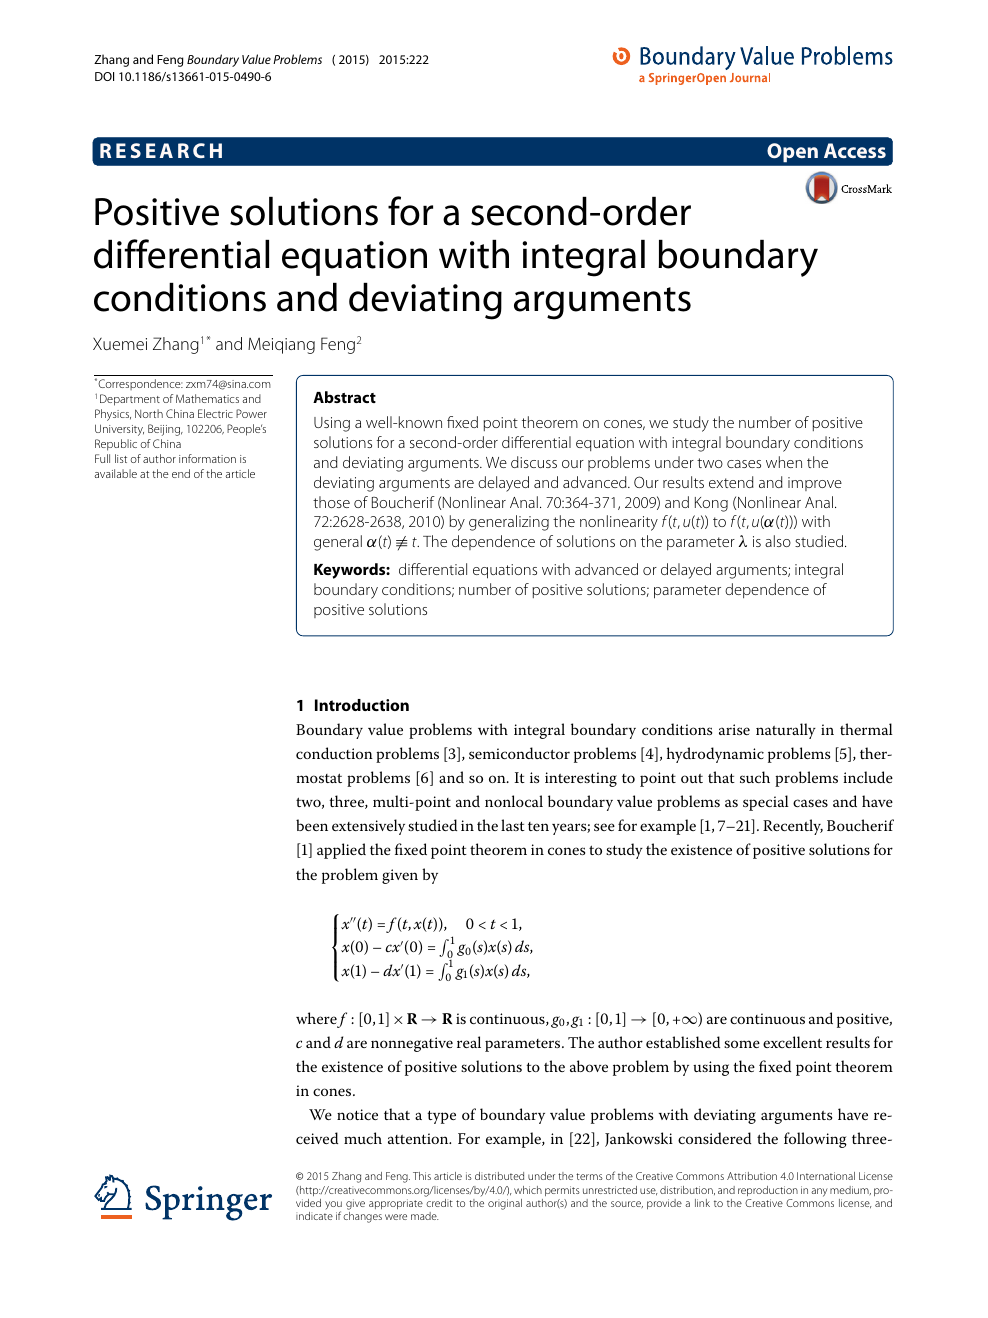 Positive Solutions For A Second Order Differential Equation With Integral Boundary Conditions And Deviating Arguments Topic Of Research Paper In Mathematics Download Scholarly Article Pdf And Read For Free On Cyberleninka Open